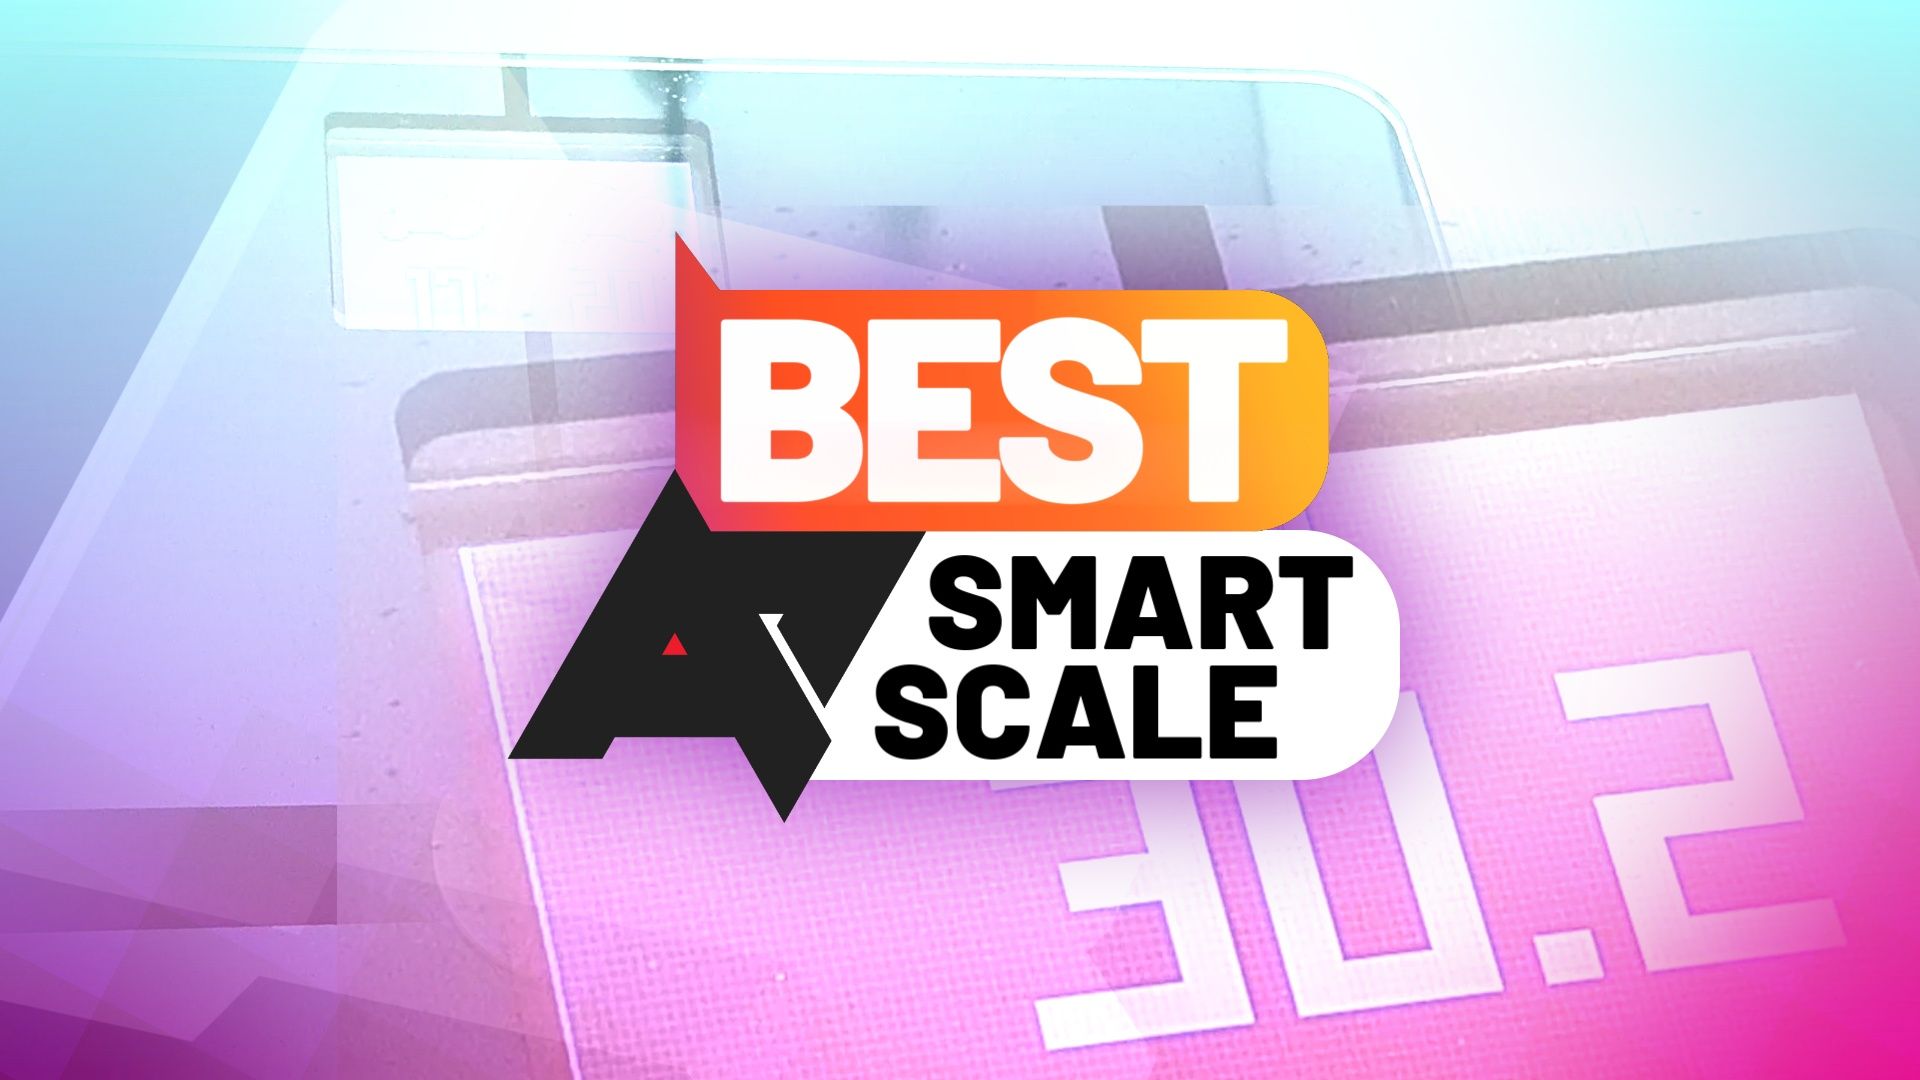 Close-up images of smart scales with an 'AP Best Smart Scale' logo